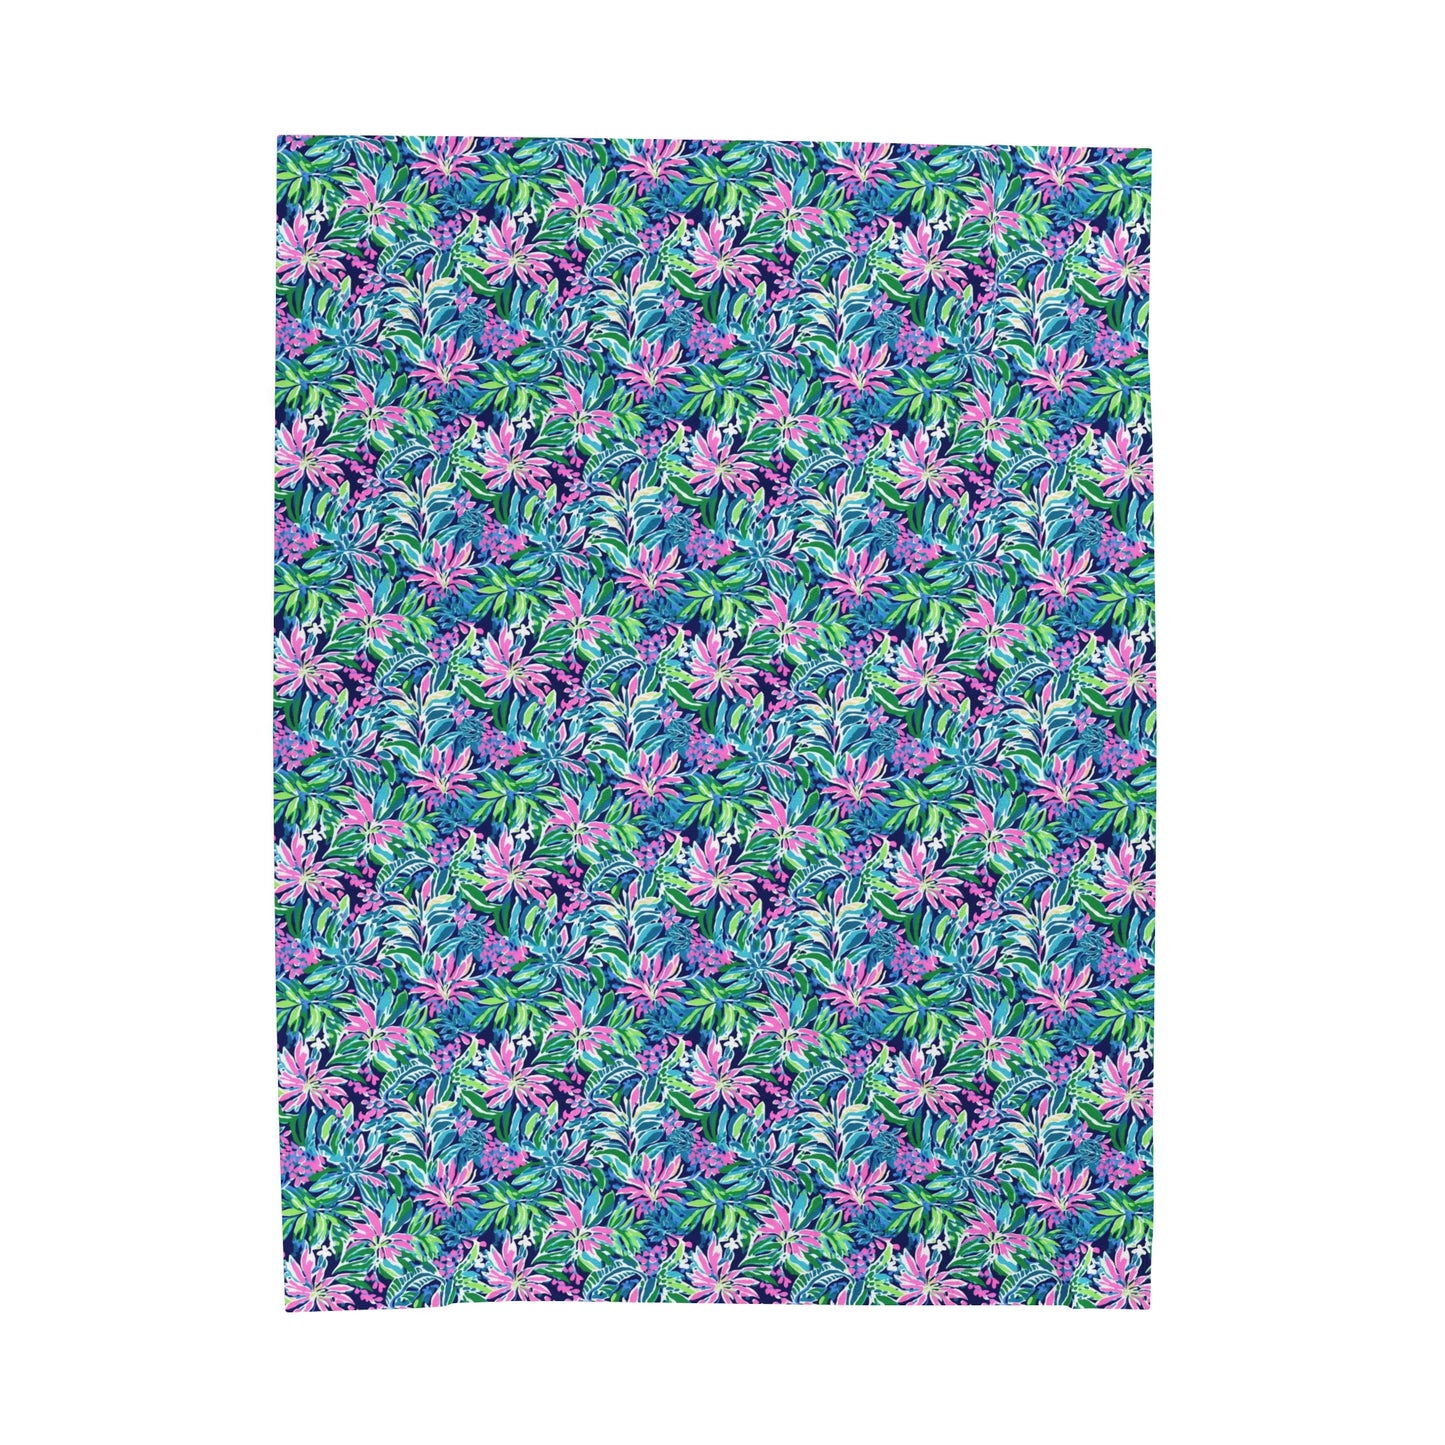 Seaside Blossoms: Coastal Spring Flowers in Pink, Green, and Navy Watercolors Velveteen Plush Blanket 3 Sizes